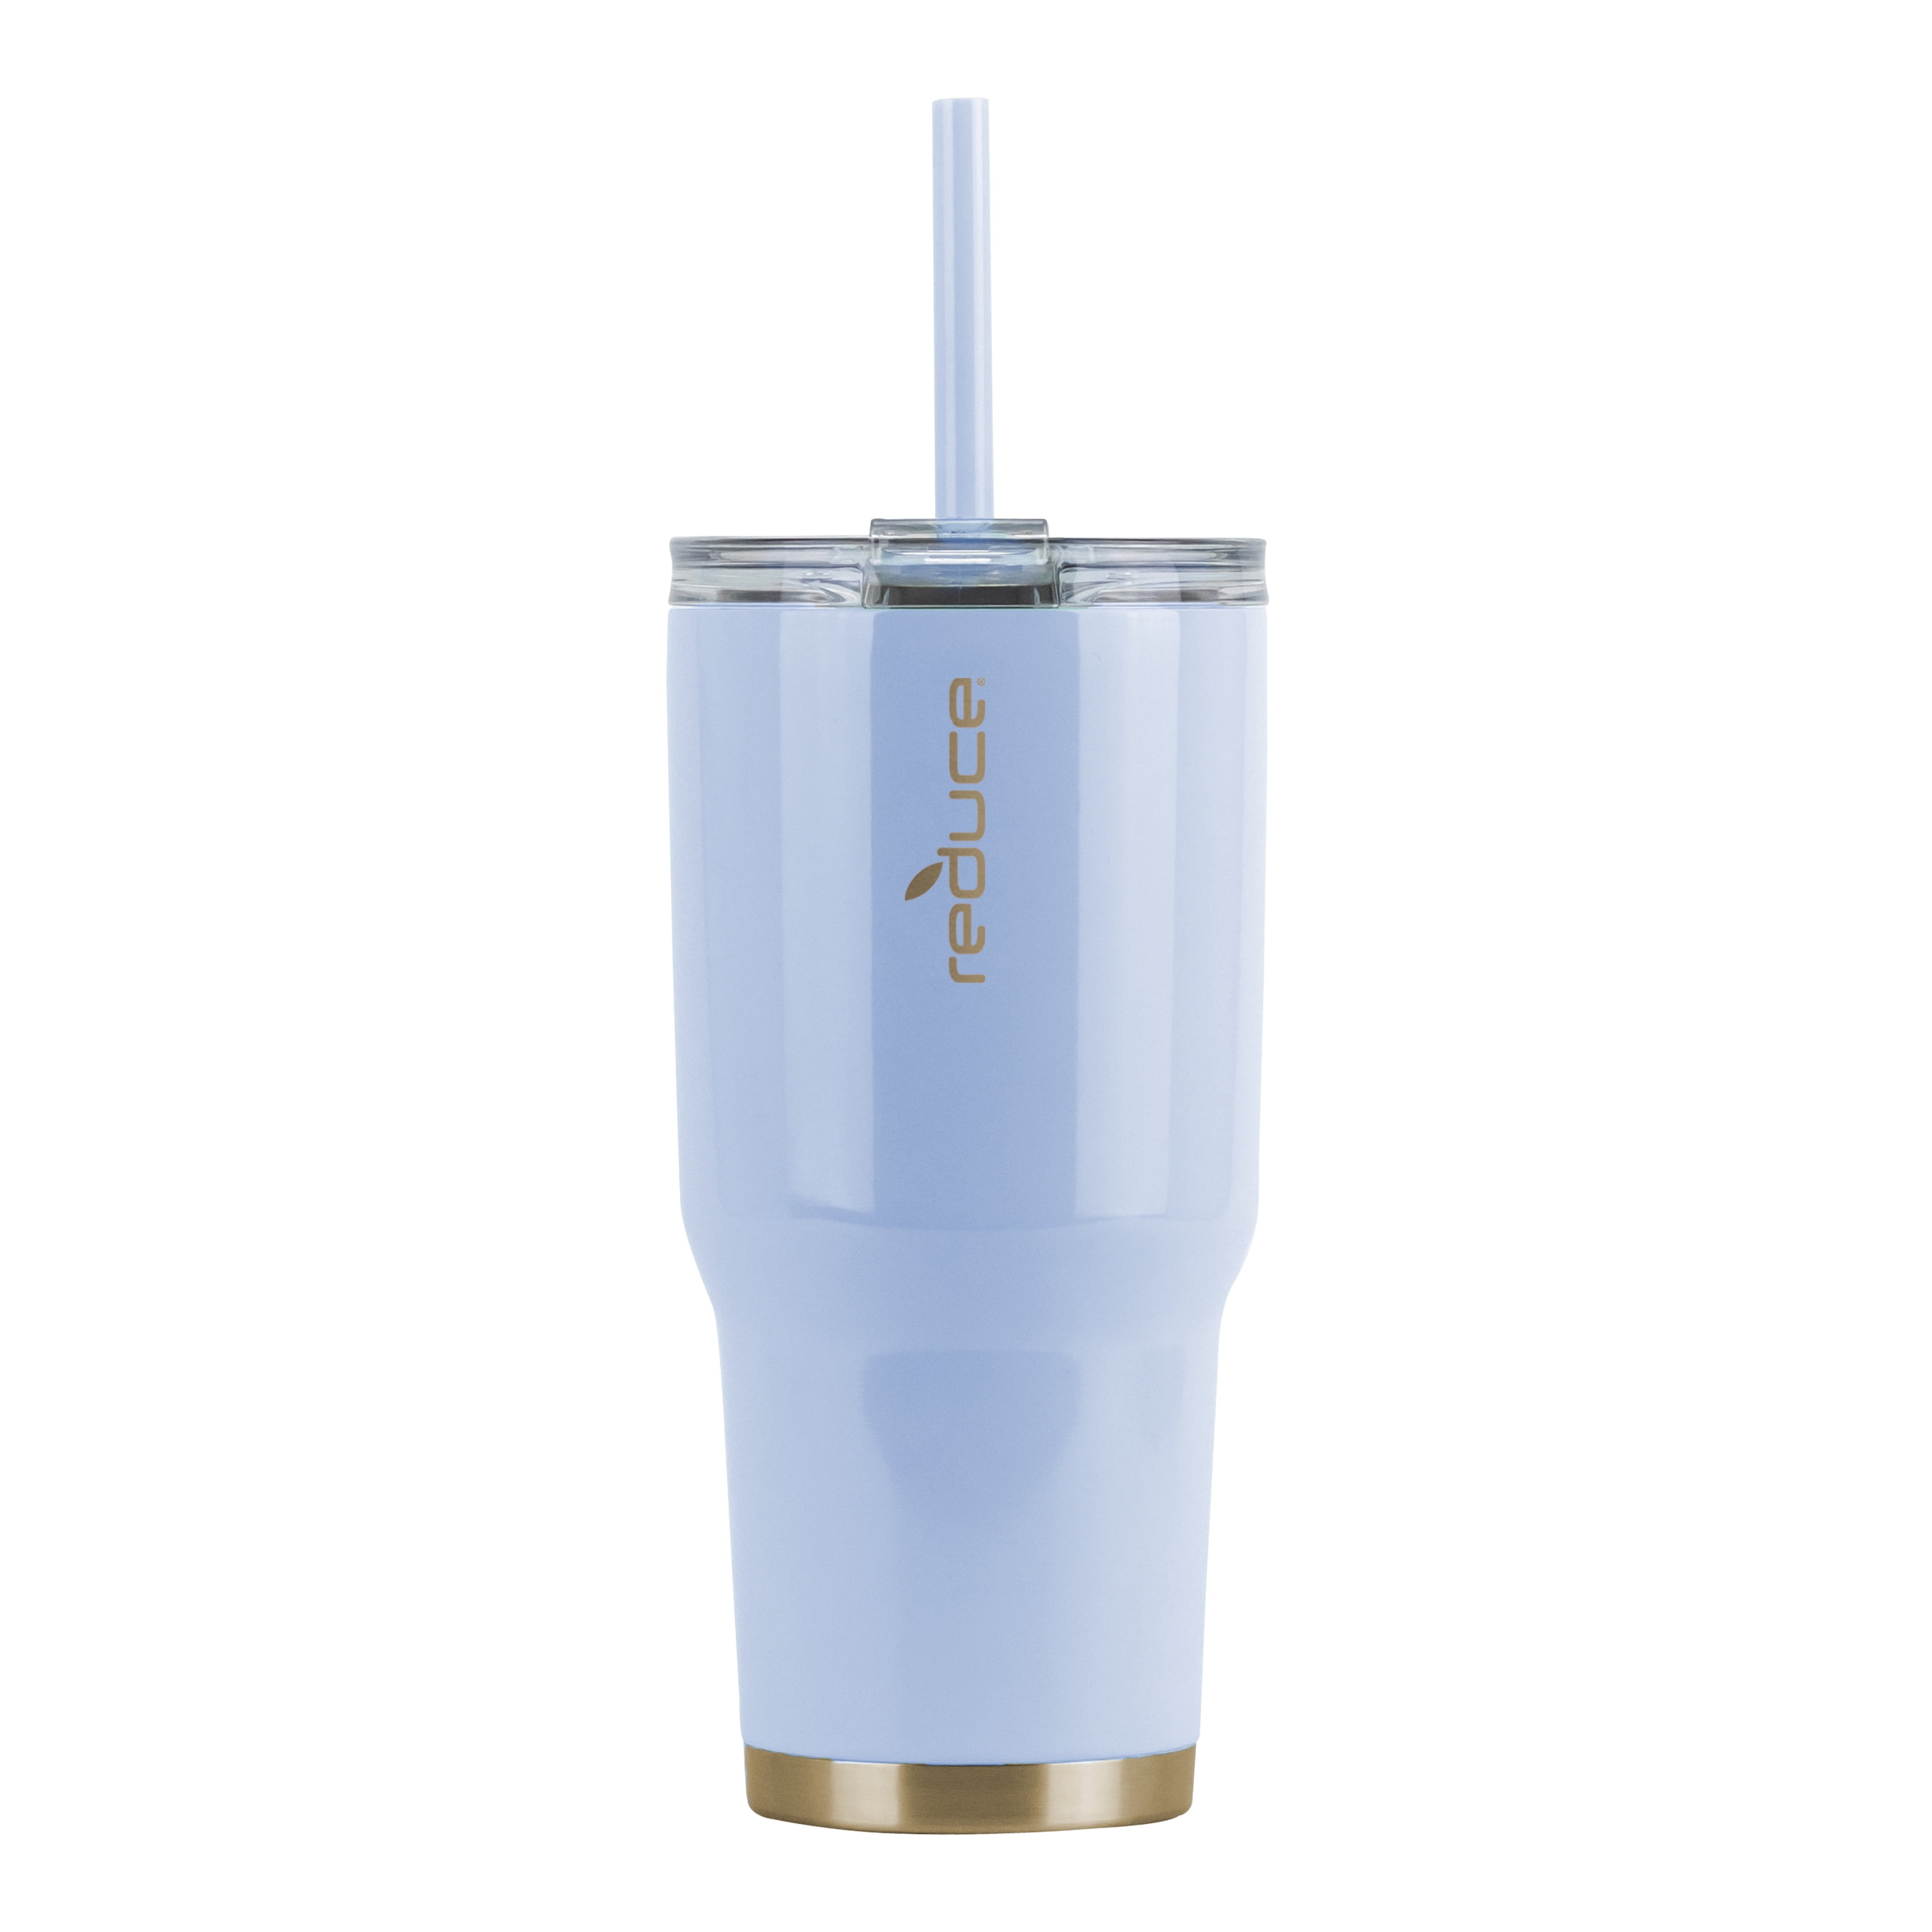 Bubba Envy S Vacuum-Insulated Stainless Steel Tumbler with Lid and Straw,  24oz Reusable Iced Coffee …See more Bubba Envy S Vacuum-Insulated Stainless